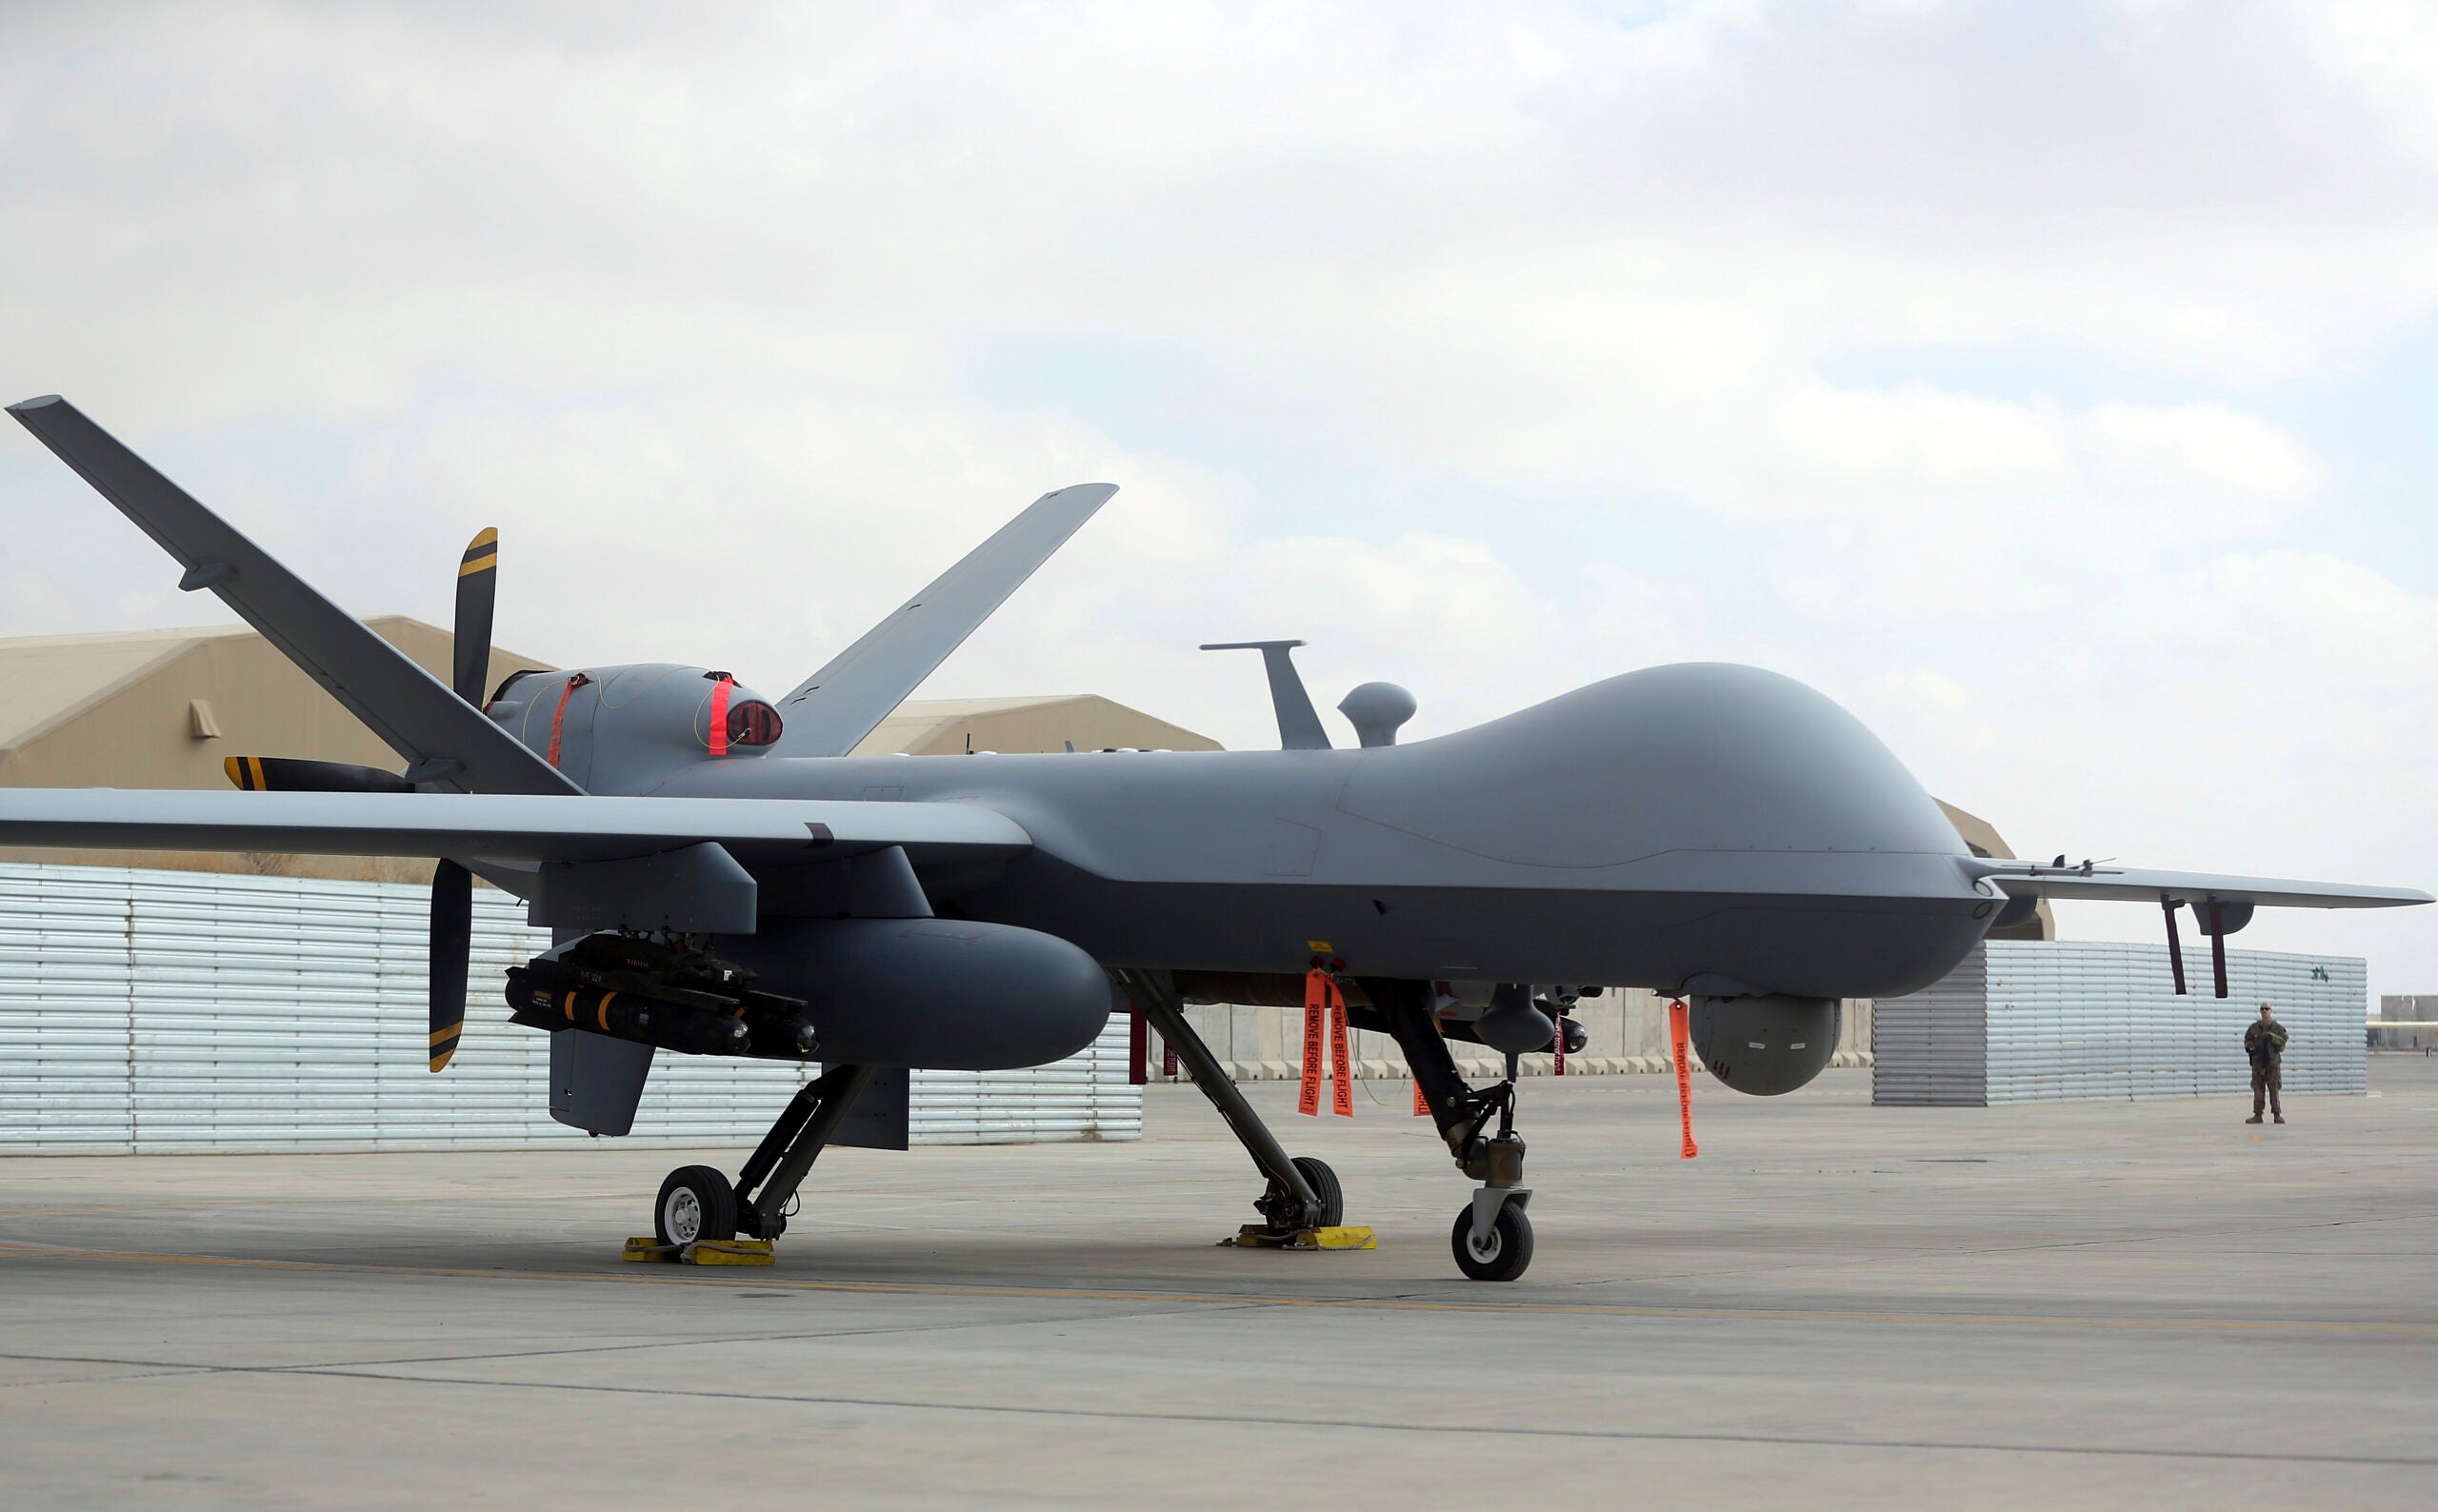 A U.S. MQ-9 drone is on display during an air show at Kandahar Airfield, Afghanistan